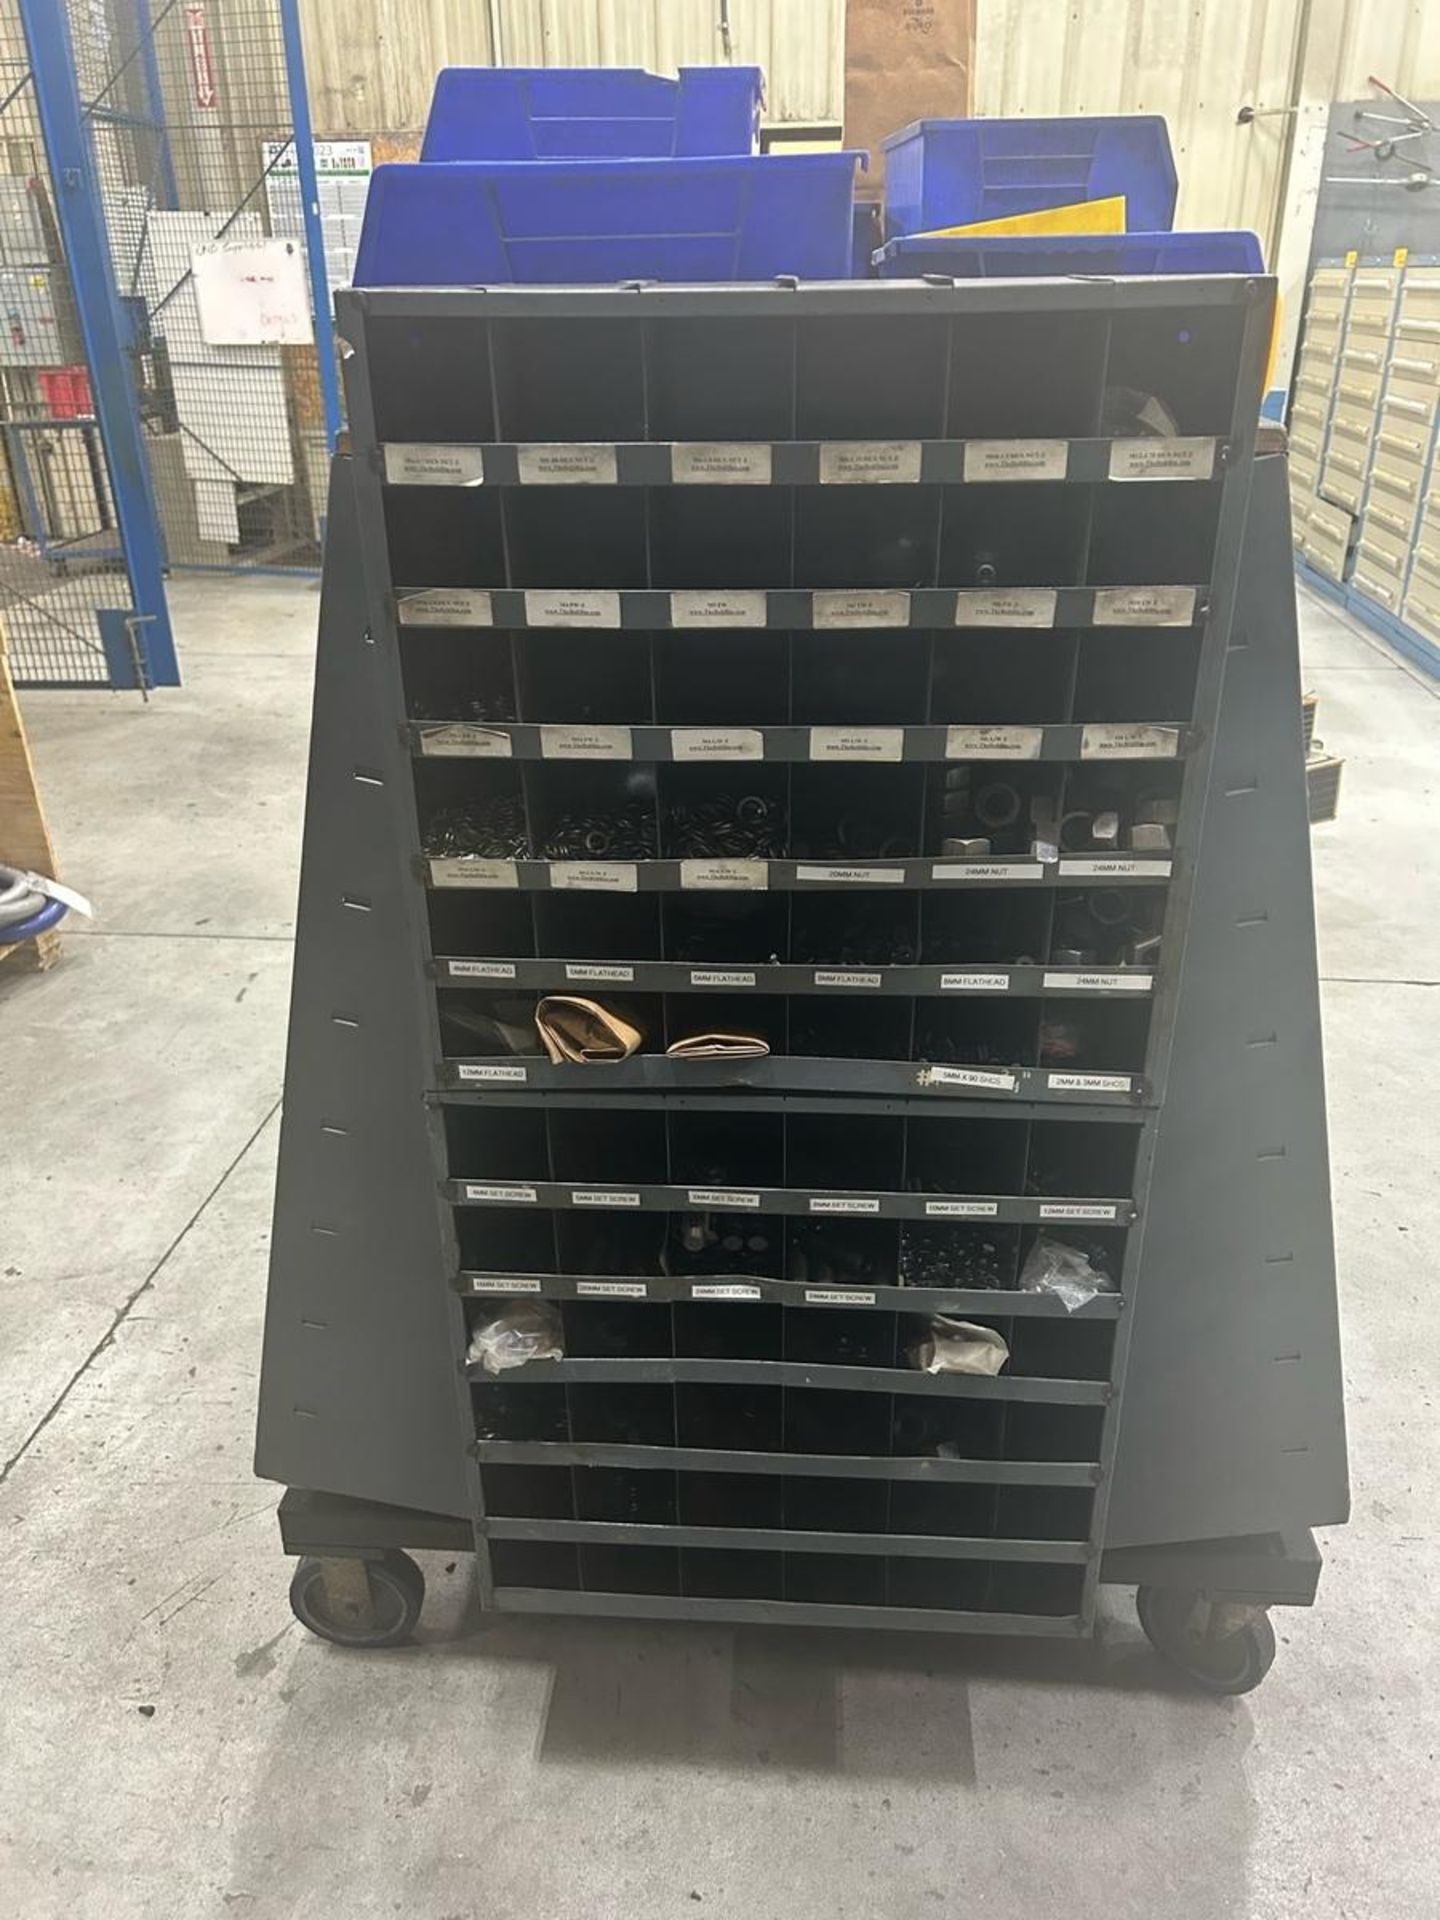 4 Sided Fastener Cart on Wheels - Image 5 of 5